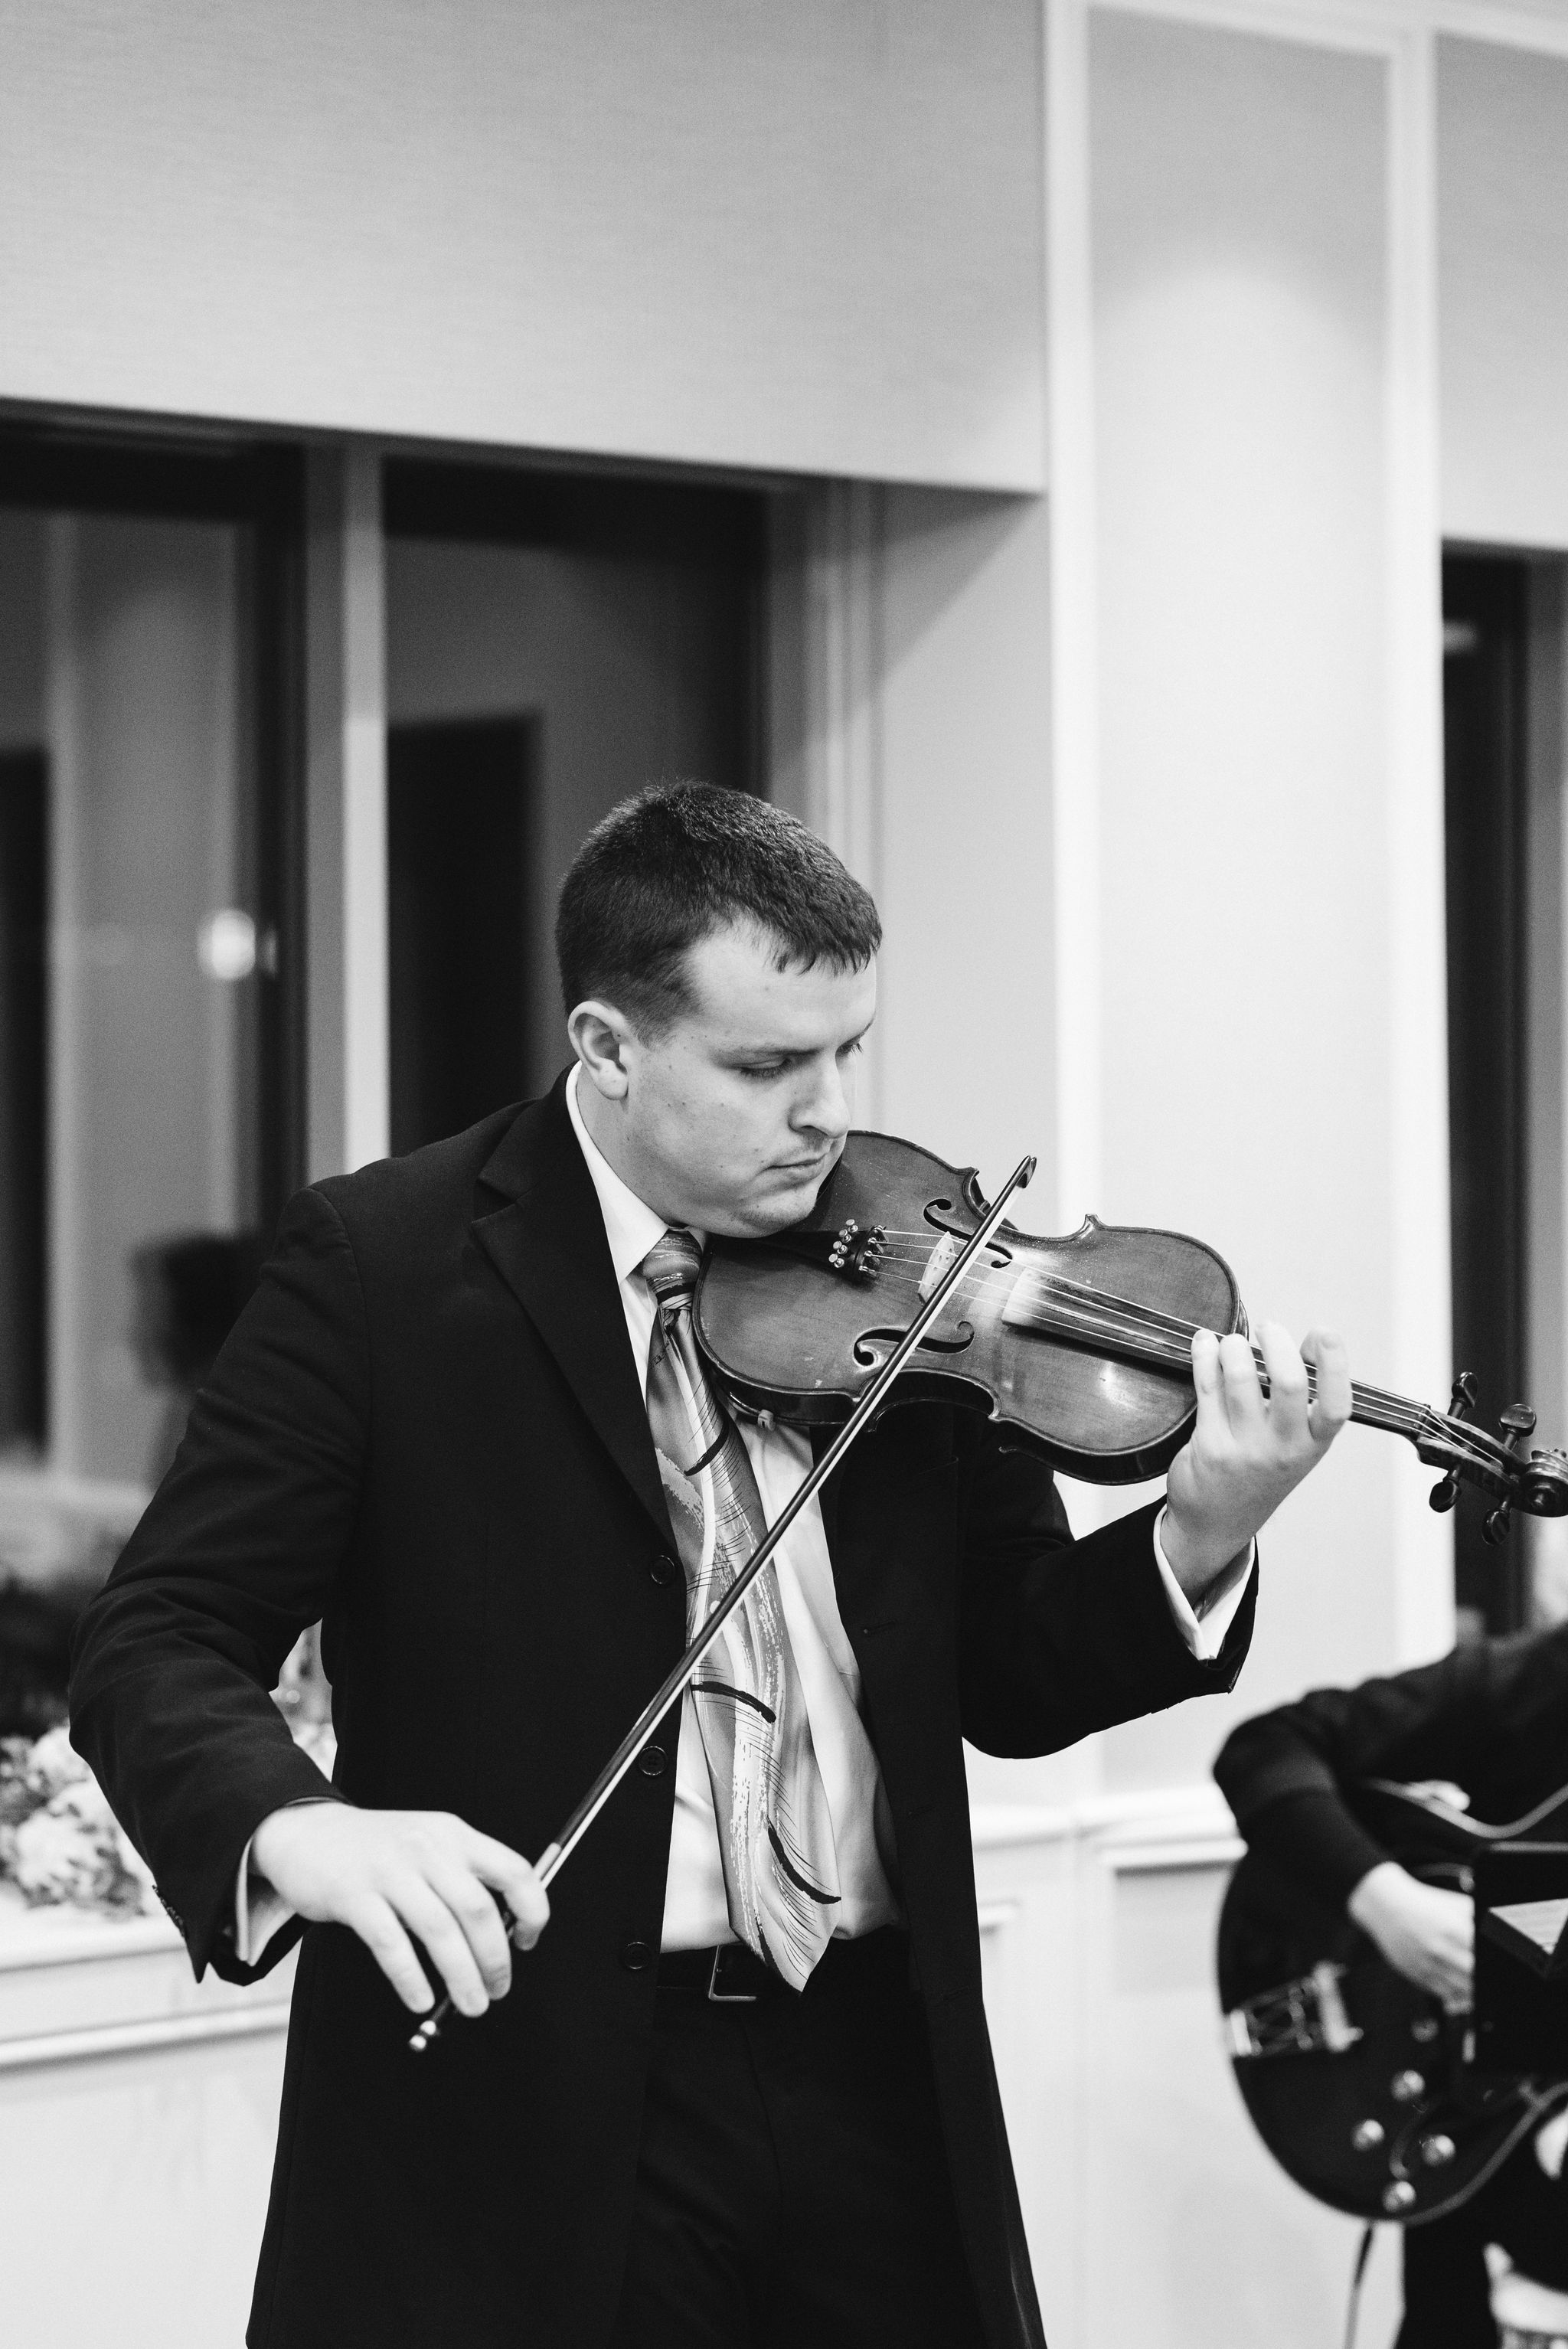  Baltimore, Fells Point, Maryland Wedding Photographer, Winter Wedding, Historic, Classic, Vintage, Musician Playing During Ceremony, Violin, Black and White Photo 